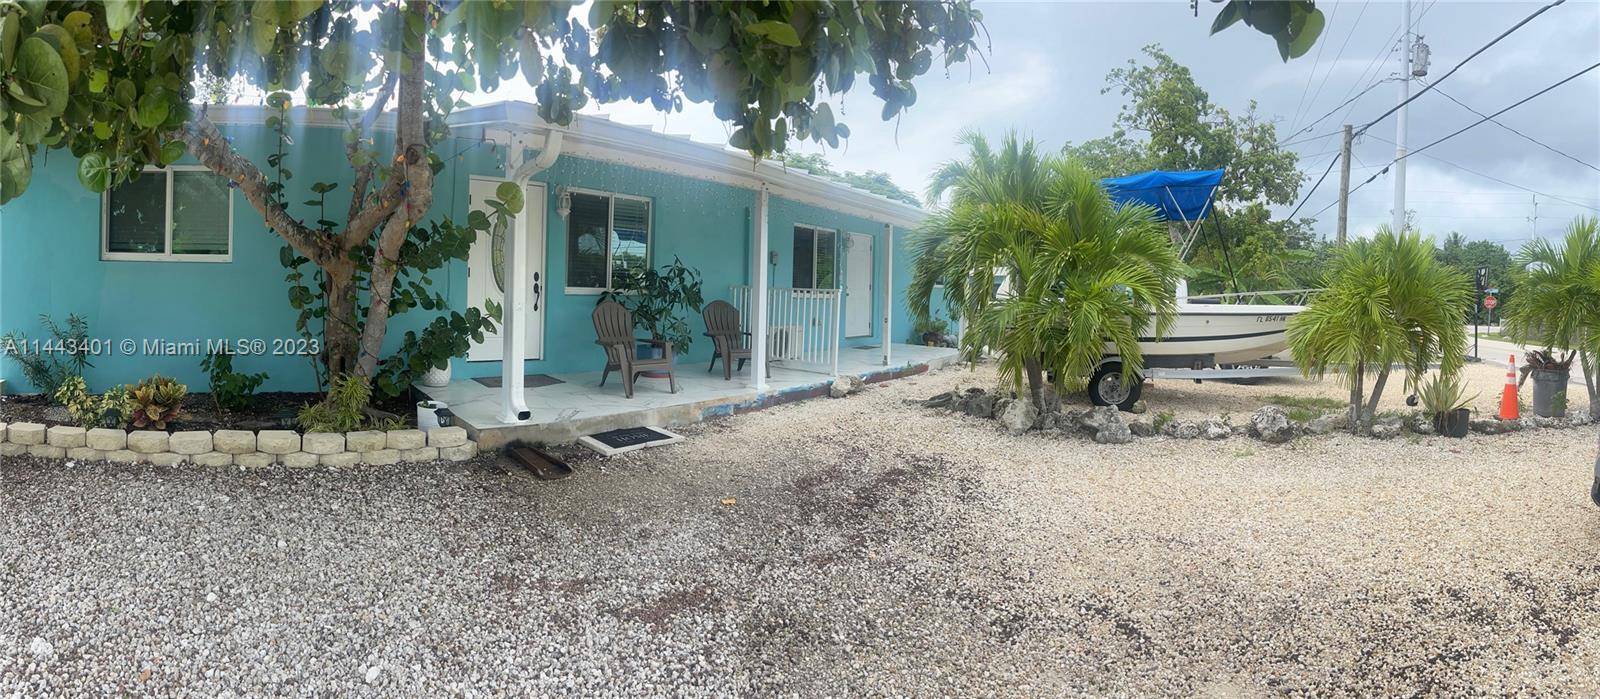 Remodeled two 3/1 units each with a new roof and space for a boat and pool. This property has no association and according to the owner it can be rented short term without restrictions, the roof is 1.5" standing seam metal. Do not wait any longer and contact us today.